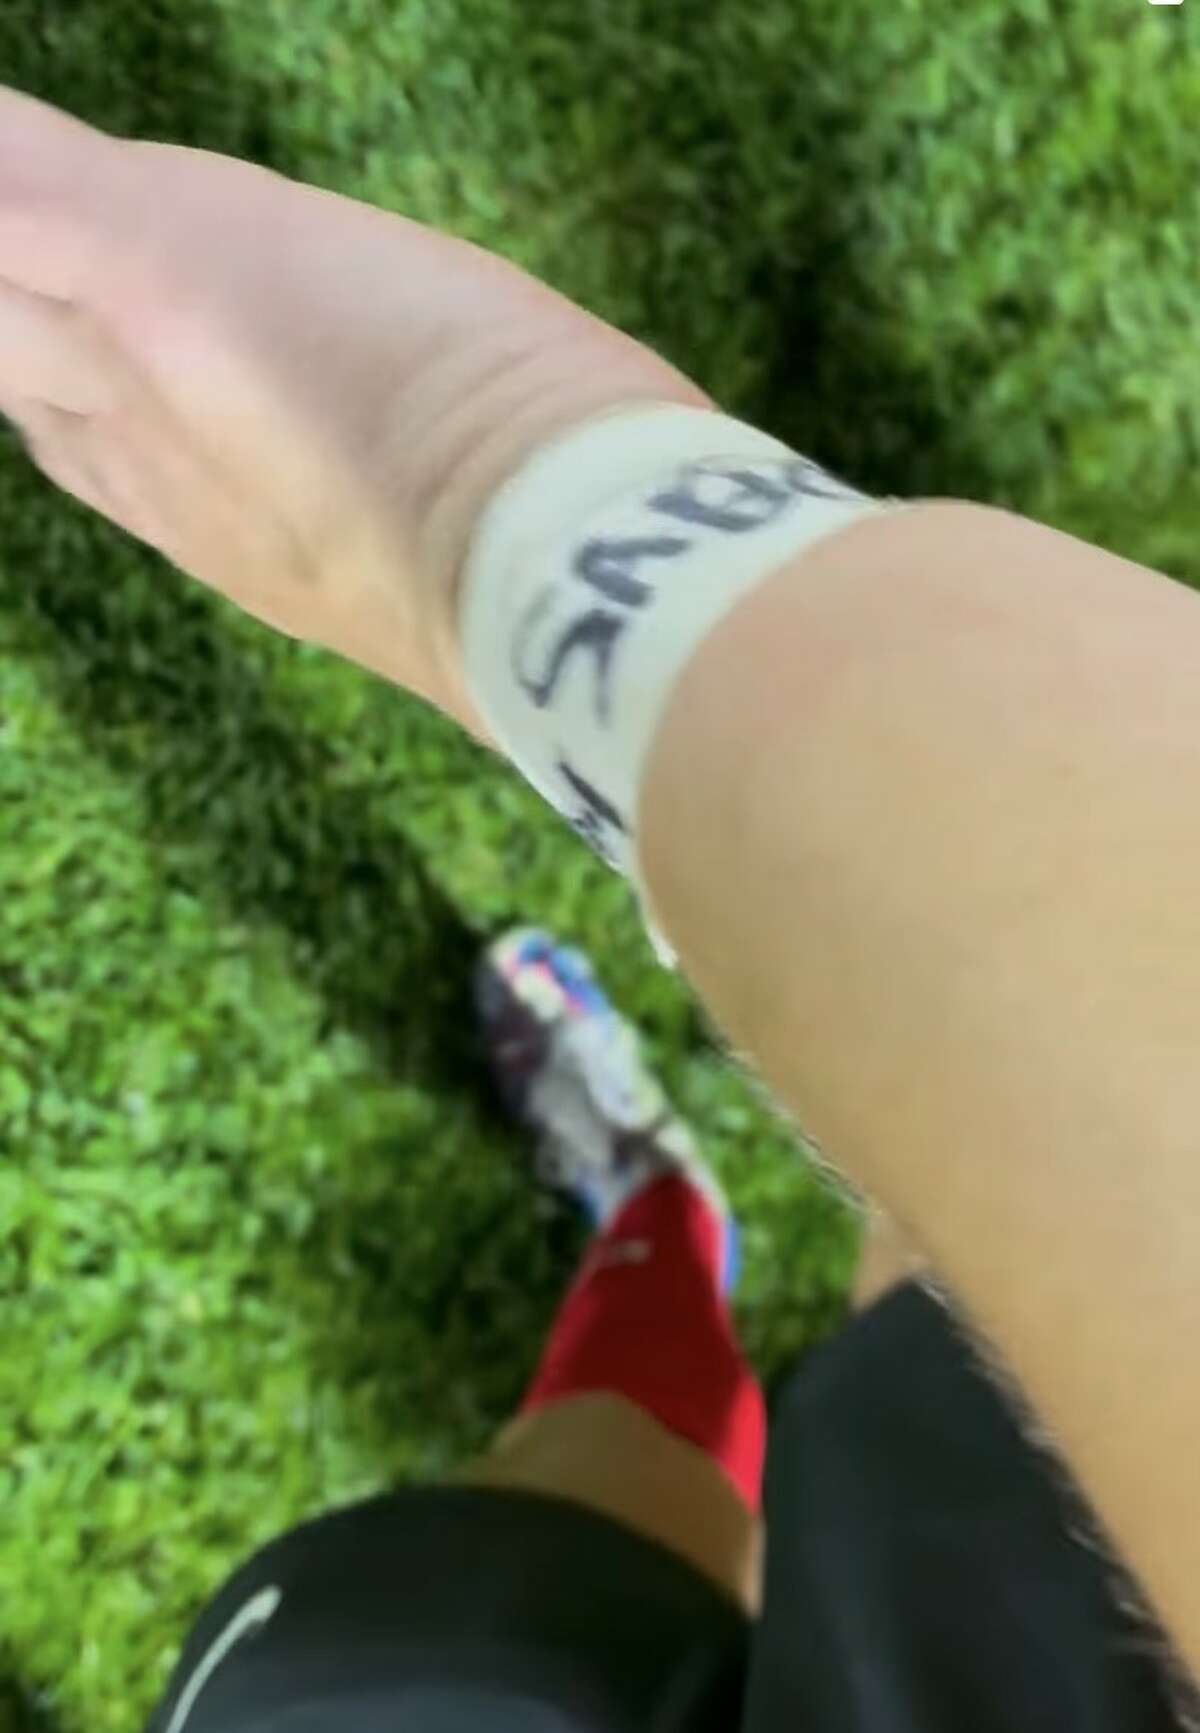 Alton High soccer player Emily Baker shows the prediction she wrote on her wrist tape at Thursday's 4-0 win over Belleville West. Baker predicted three goals for "Baby Sabo," and she scored three goals. AHS coach Gwen Sabo is expecting a baby in June.